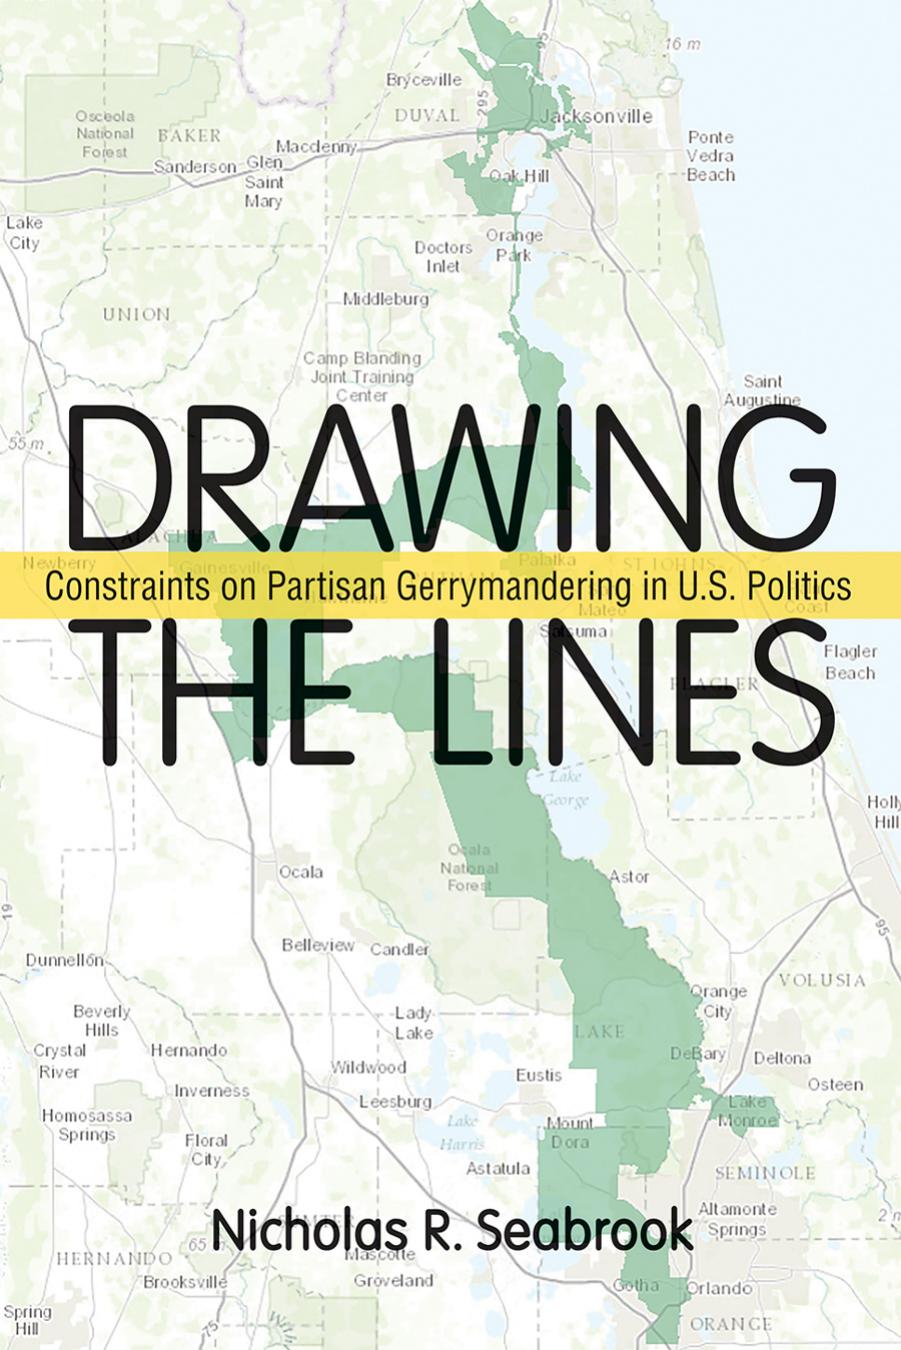 Drawing the Lines: Constraints on Partisan Gerrymandering in U.S. Politics by Nicholas R. Seabrook